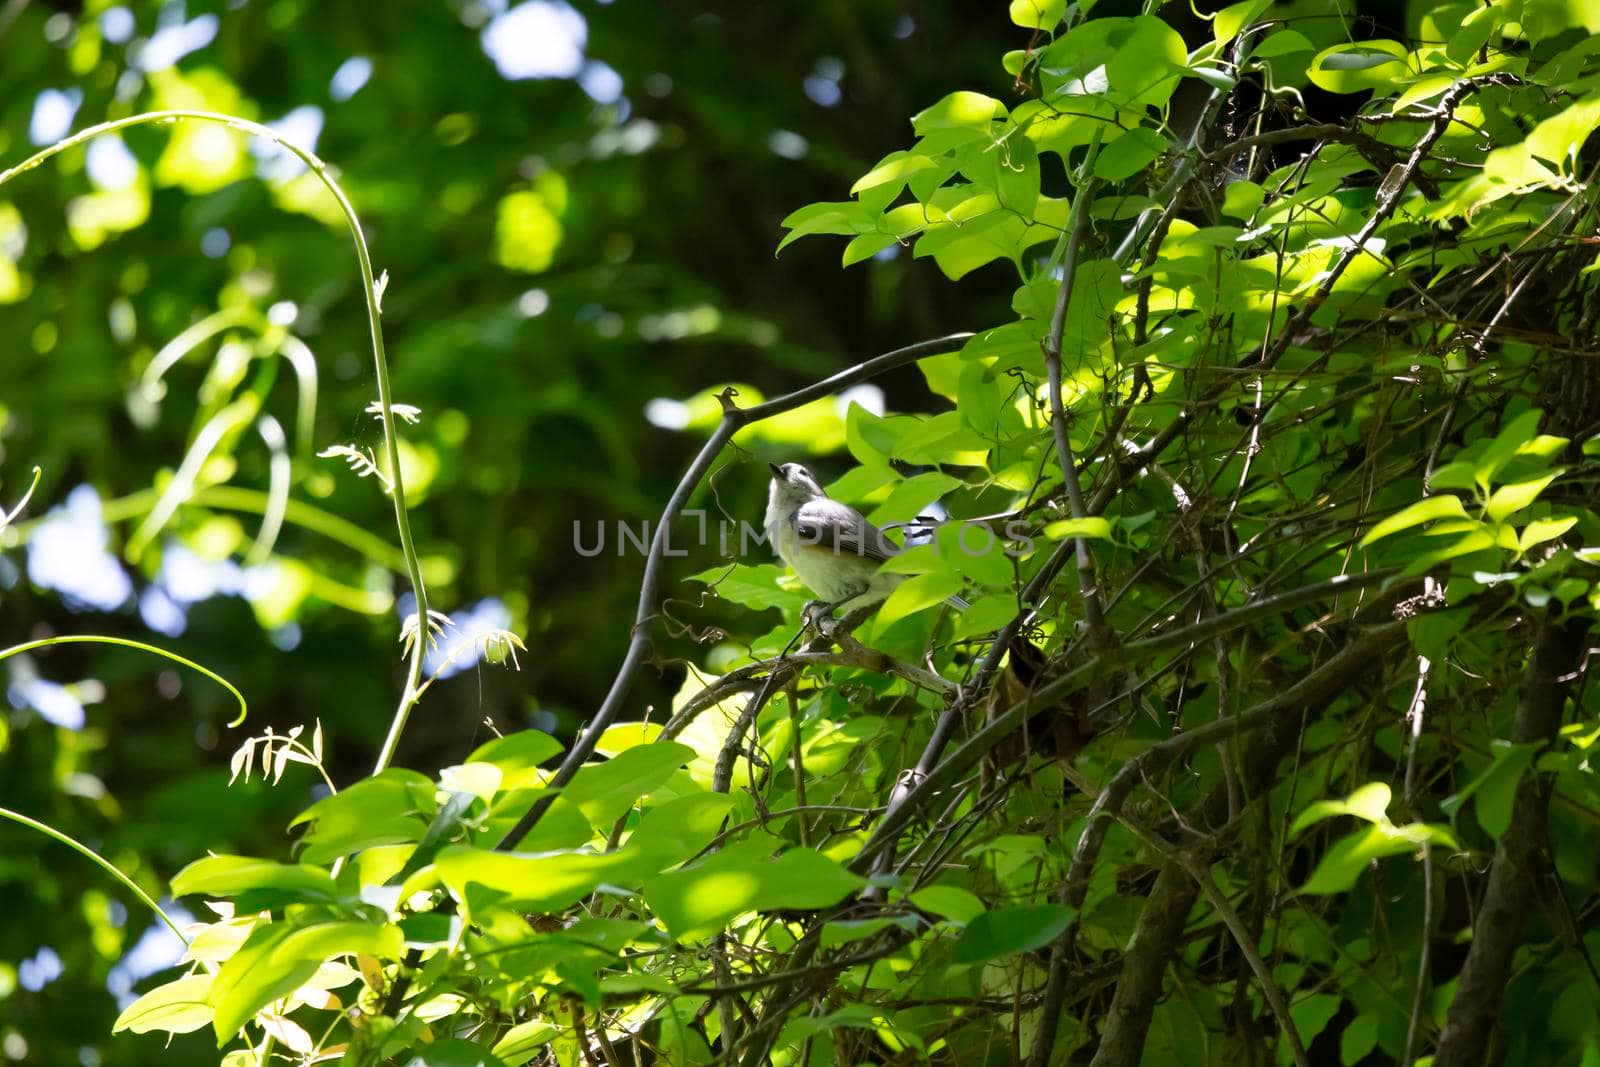 Tufted titmouse (Baeolophus bicolor) looking around majestically from its perch on a tree branch